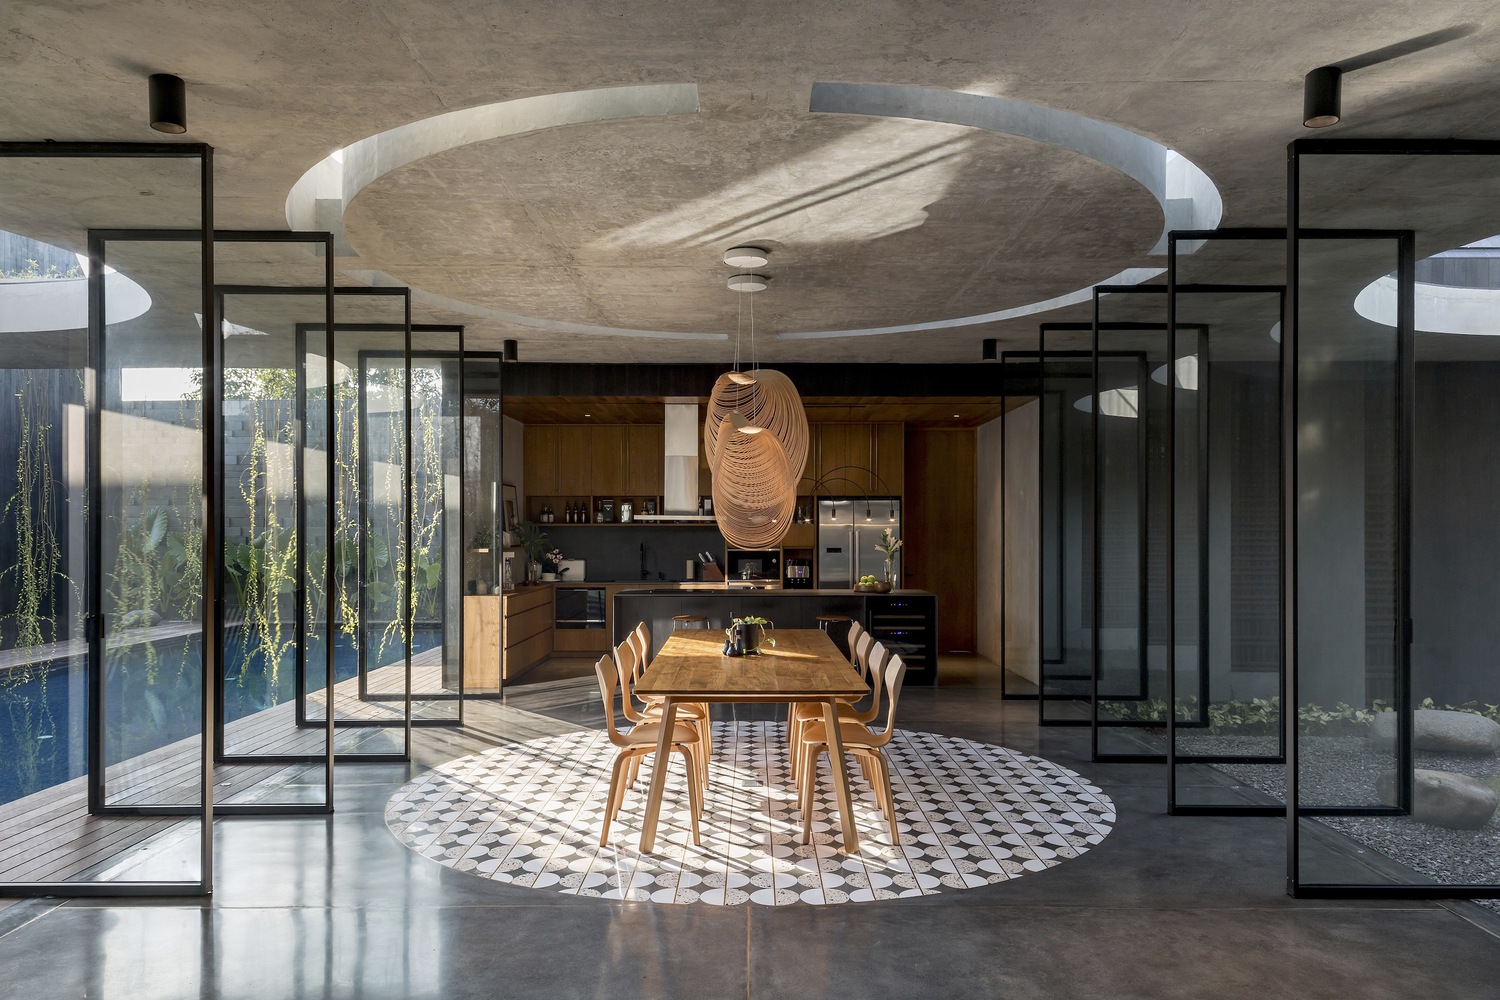 The dining area for Halo House. Photo by Andreaswidi.